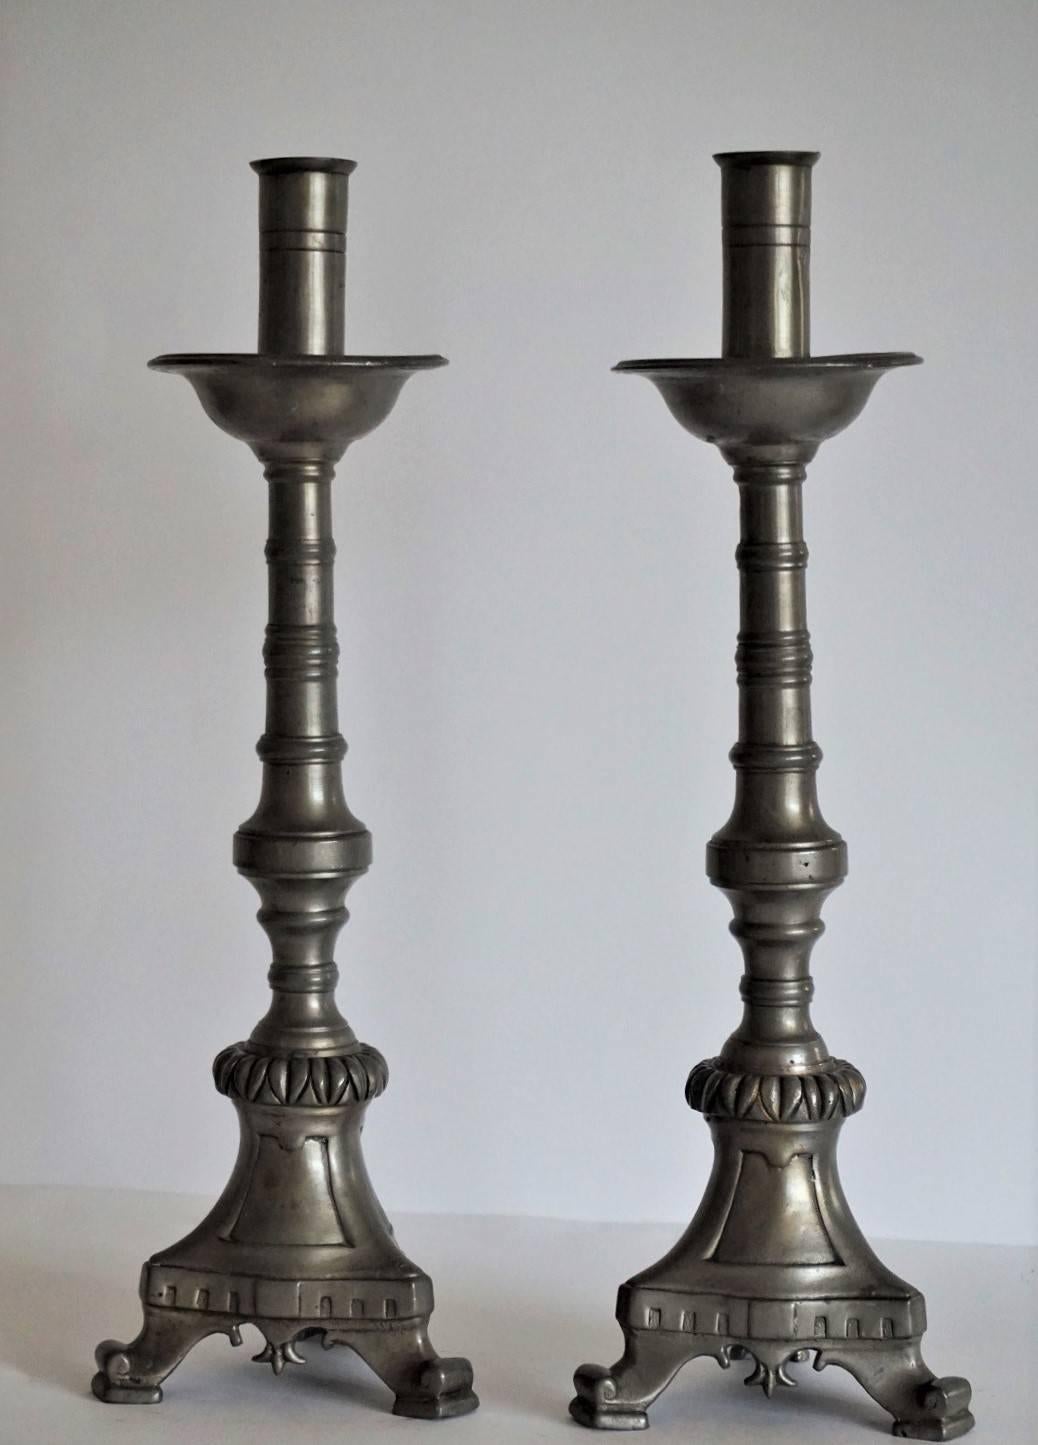 A pair of Scandinavian pewter altar candlesticks of Gothic form, probably, Swedish, late 19th century. Turned column raised on tripod base, good condition.

Measures: Height 17 in (43 cm)
Width/depth 4.75 in (12 cm).

                